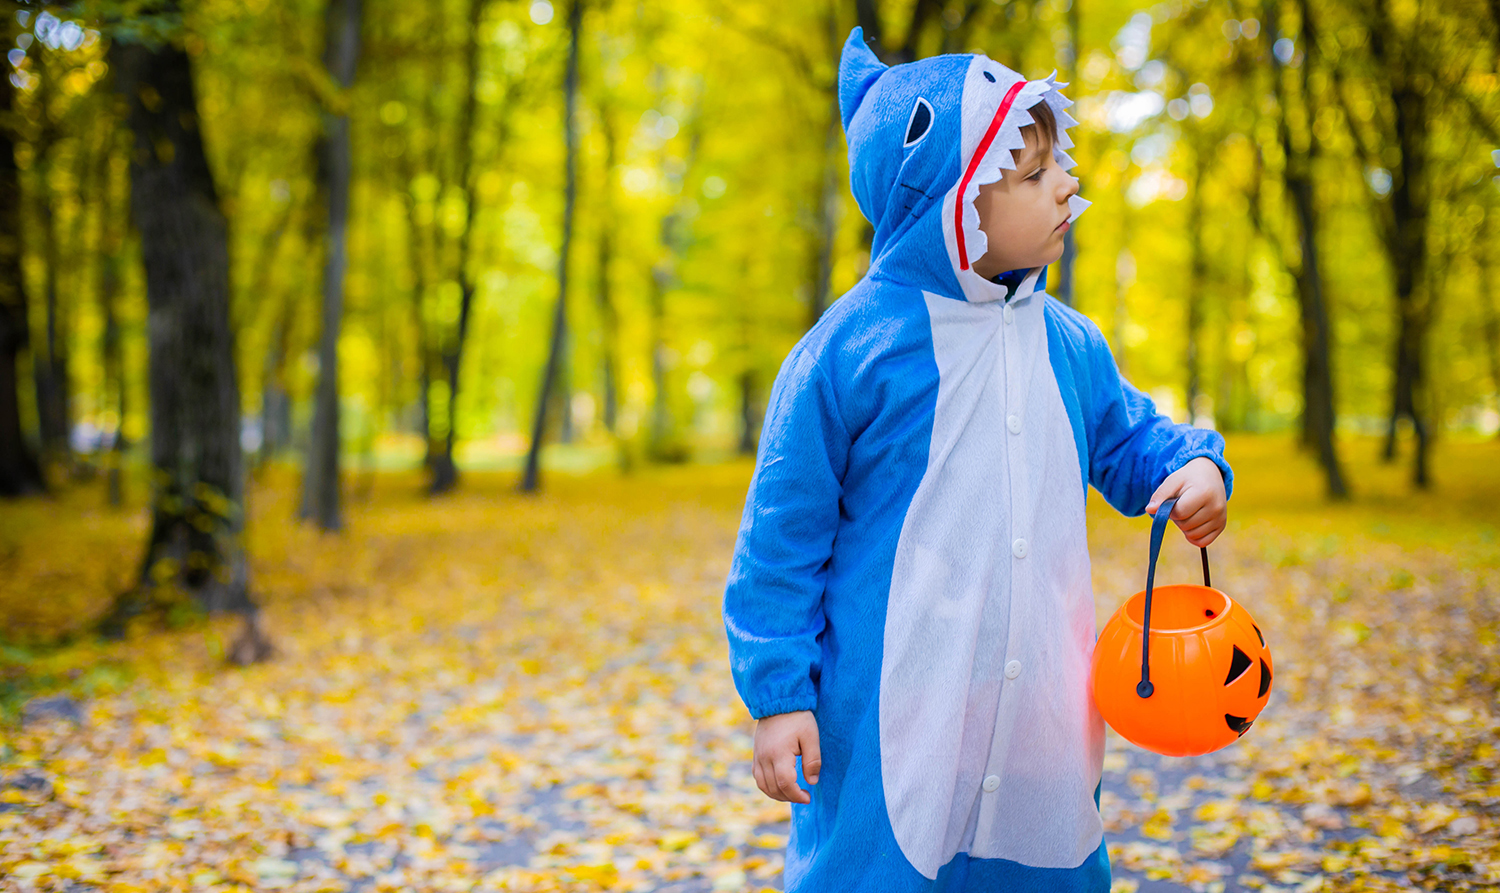 10 of the Best Ocean Costumes for Kids